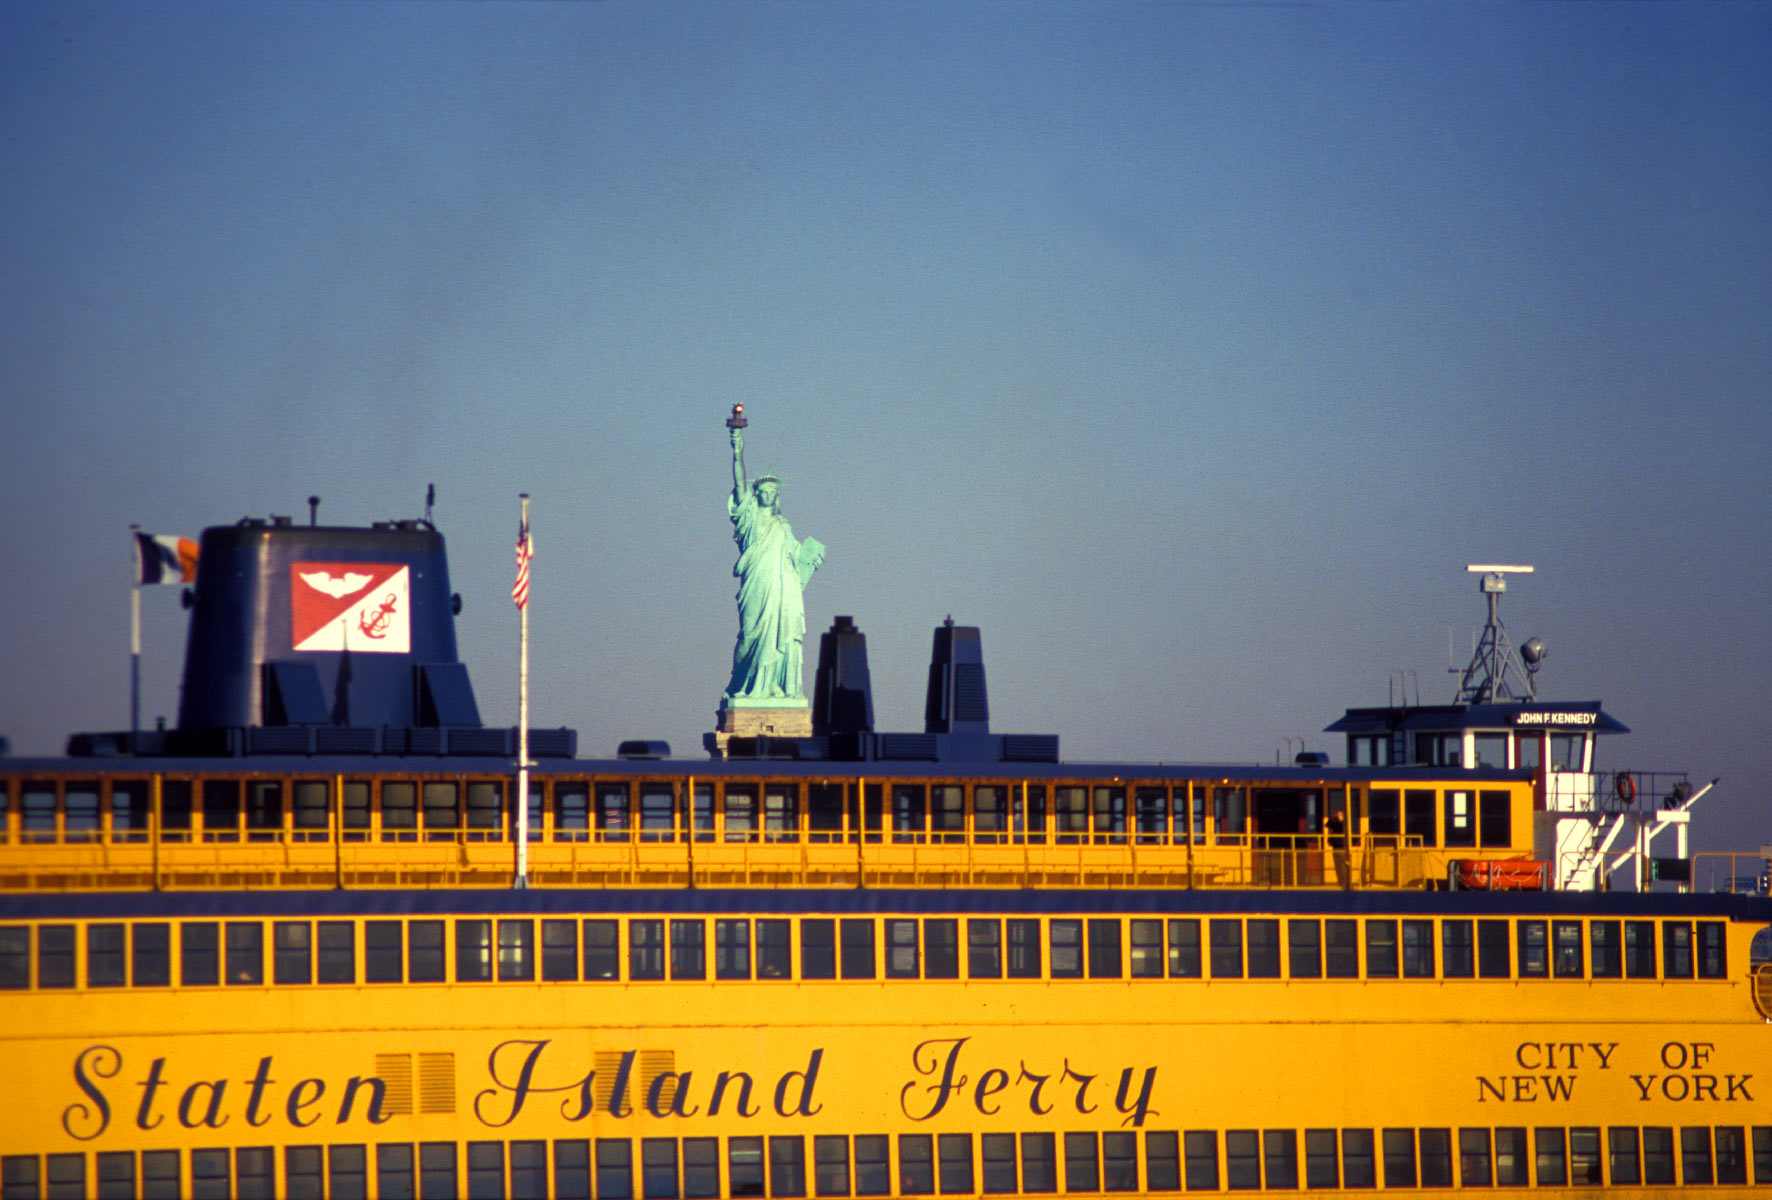 Staten Island Ferry with the Statue of Liberty